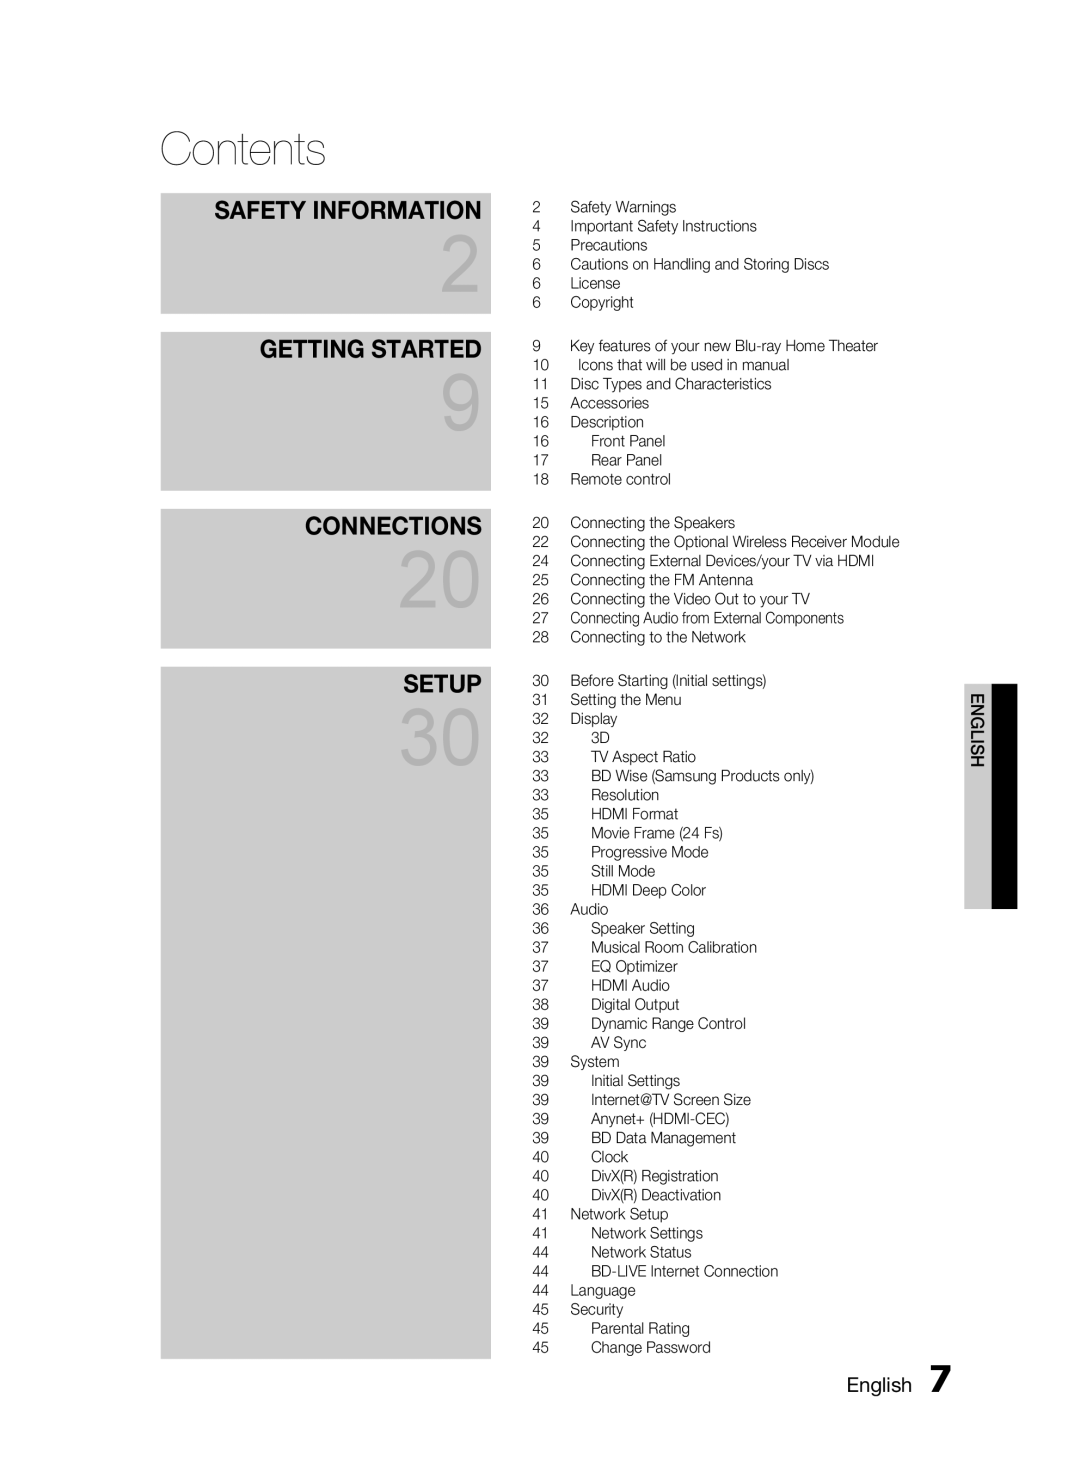 Samsung C6600 user manual Contents, Getting Started, Connections, Setup, Safety Information, English 